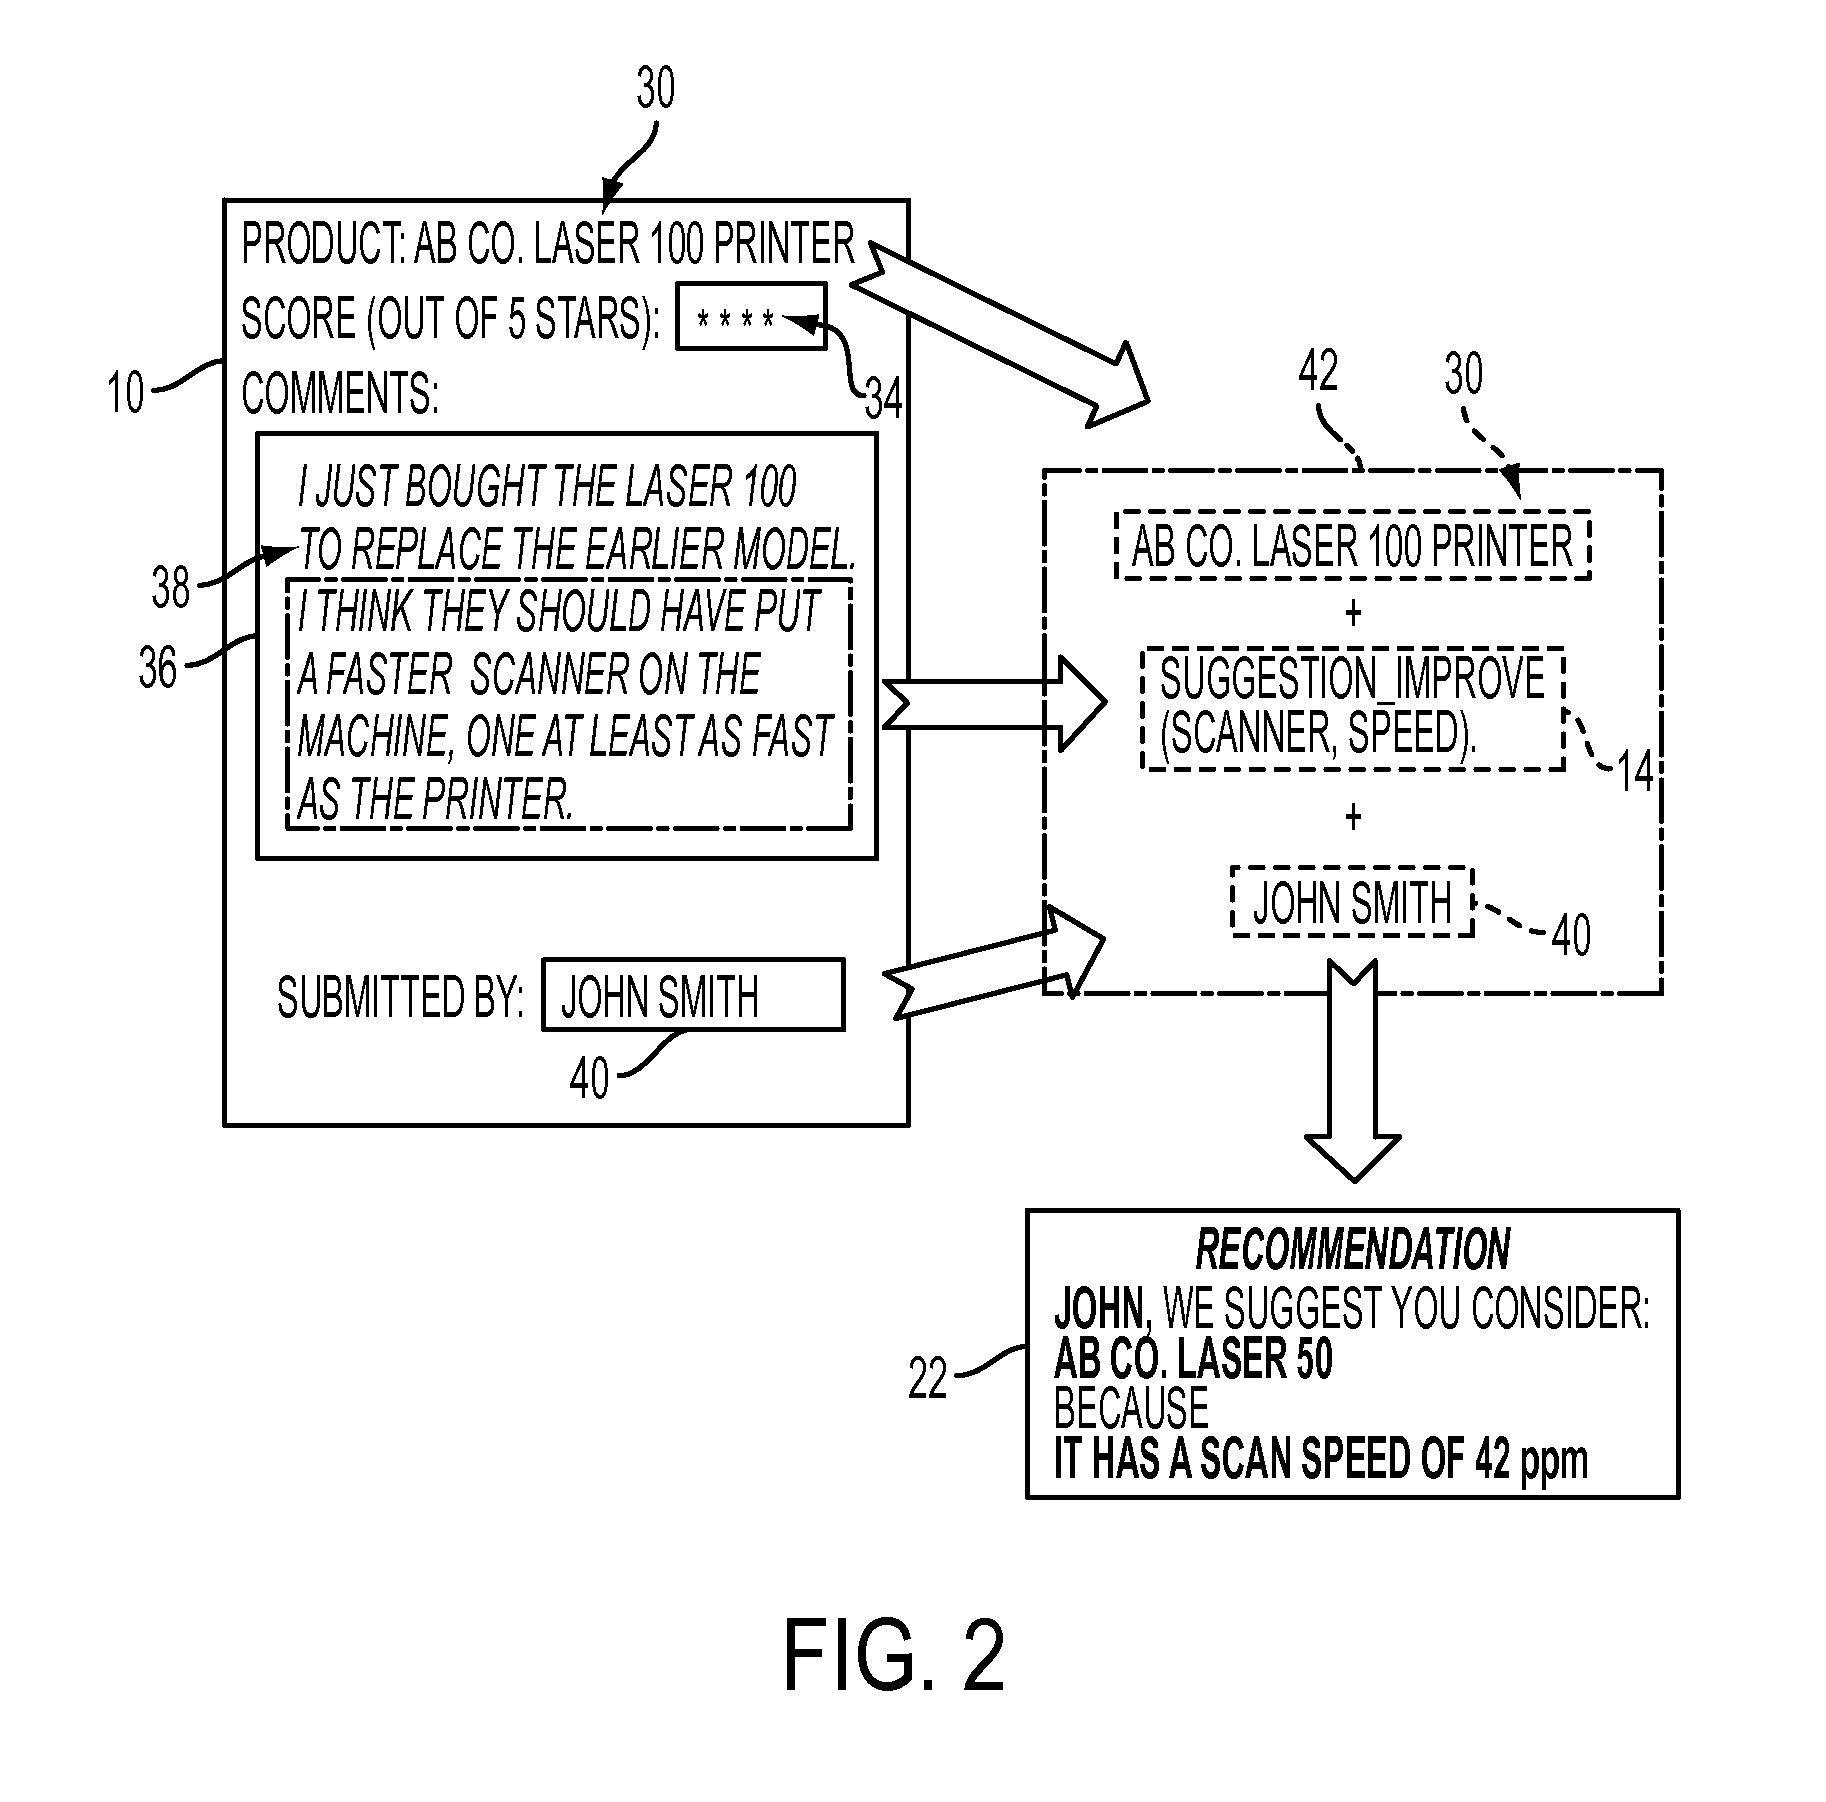 System and method for providing recommendations based on information extracted from reviewers' comments